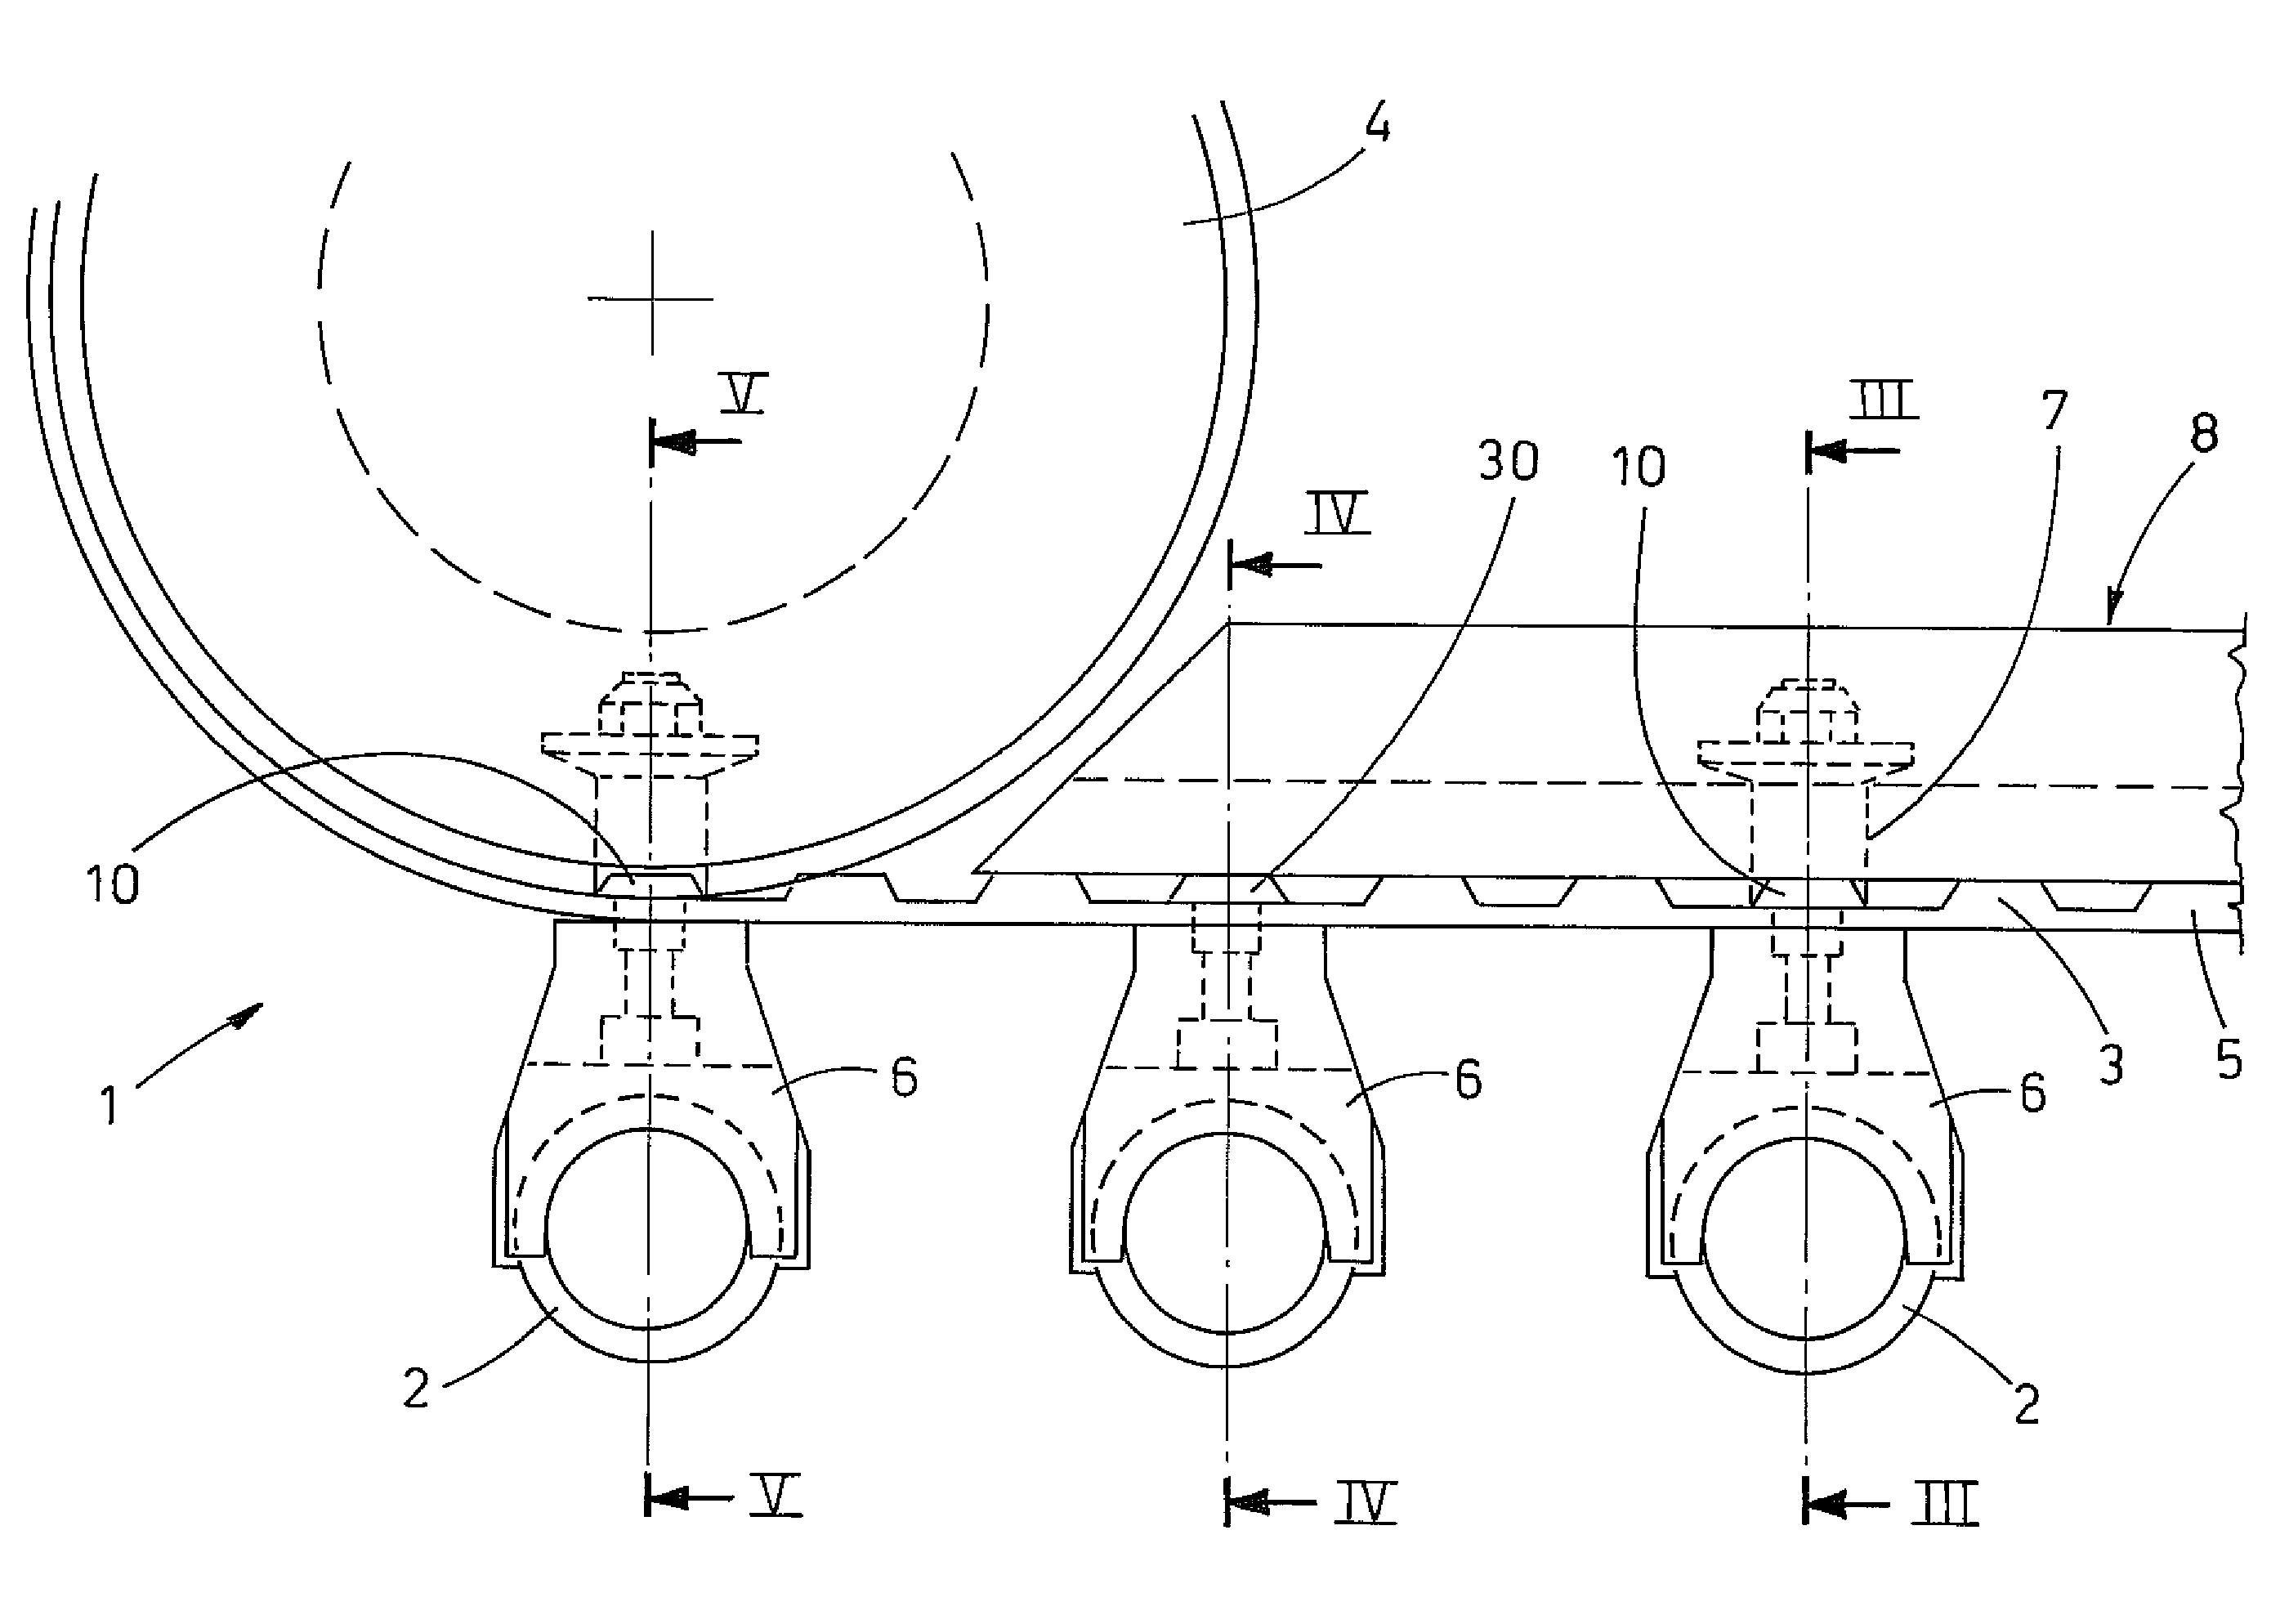 Device for transporting containers